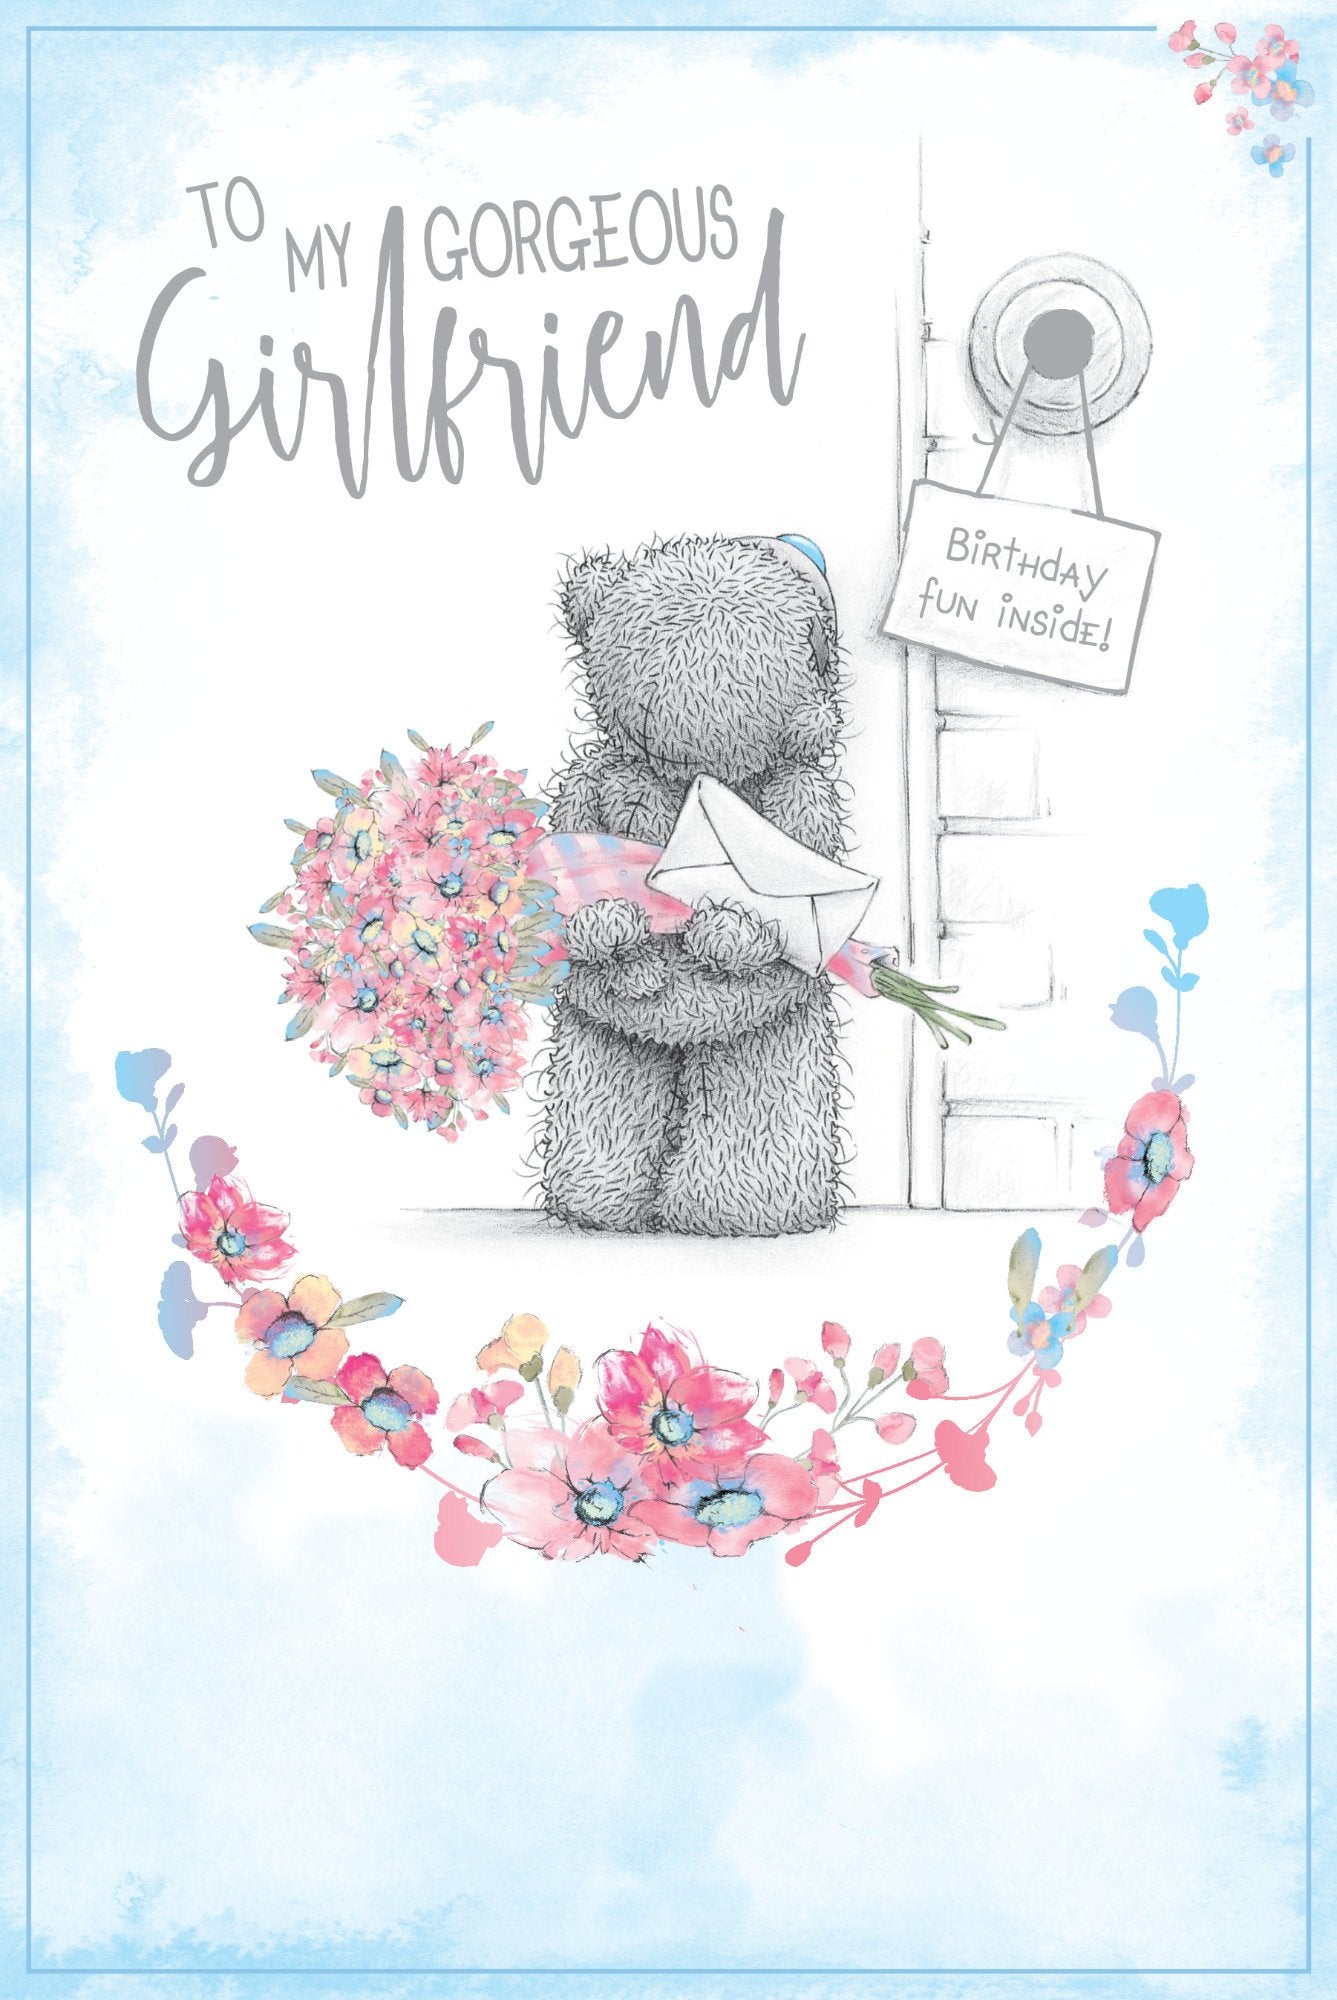 Photograph of Girlfriend Birthday Teddy Envelope Greetings Card at Nicole's Shop